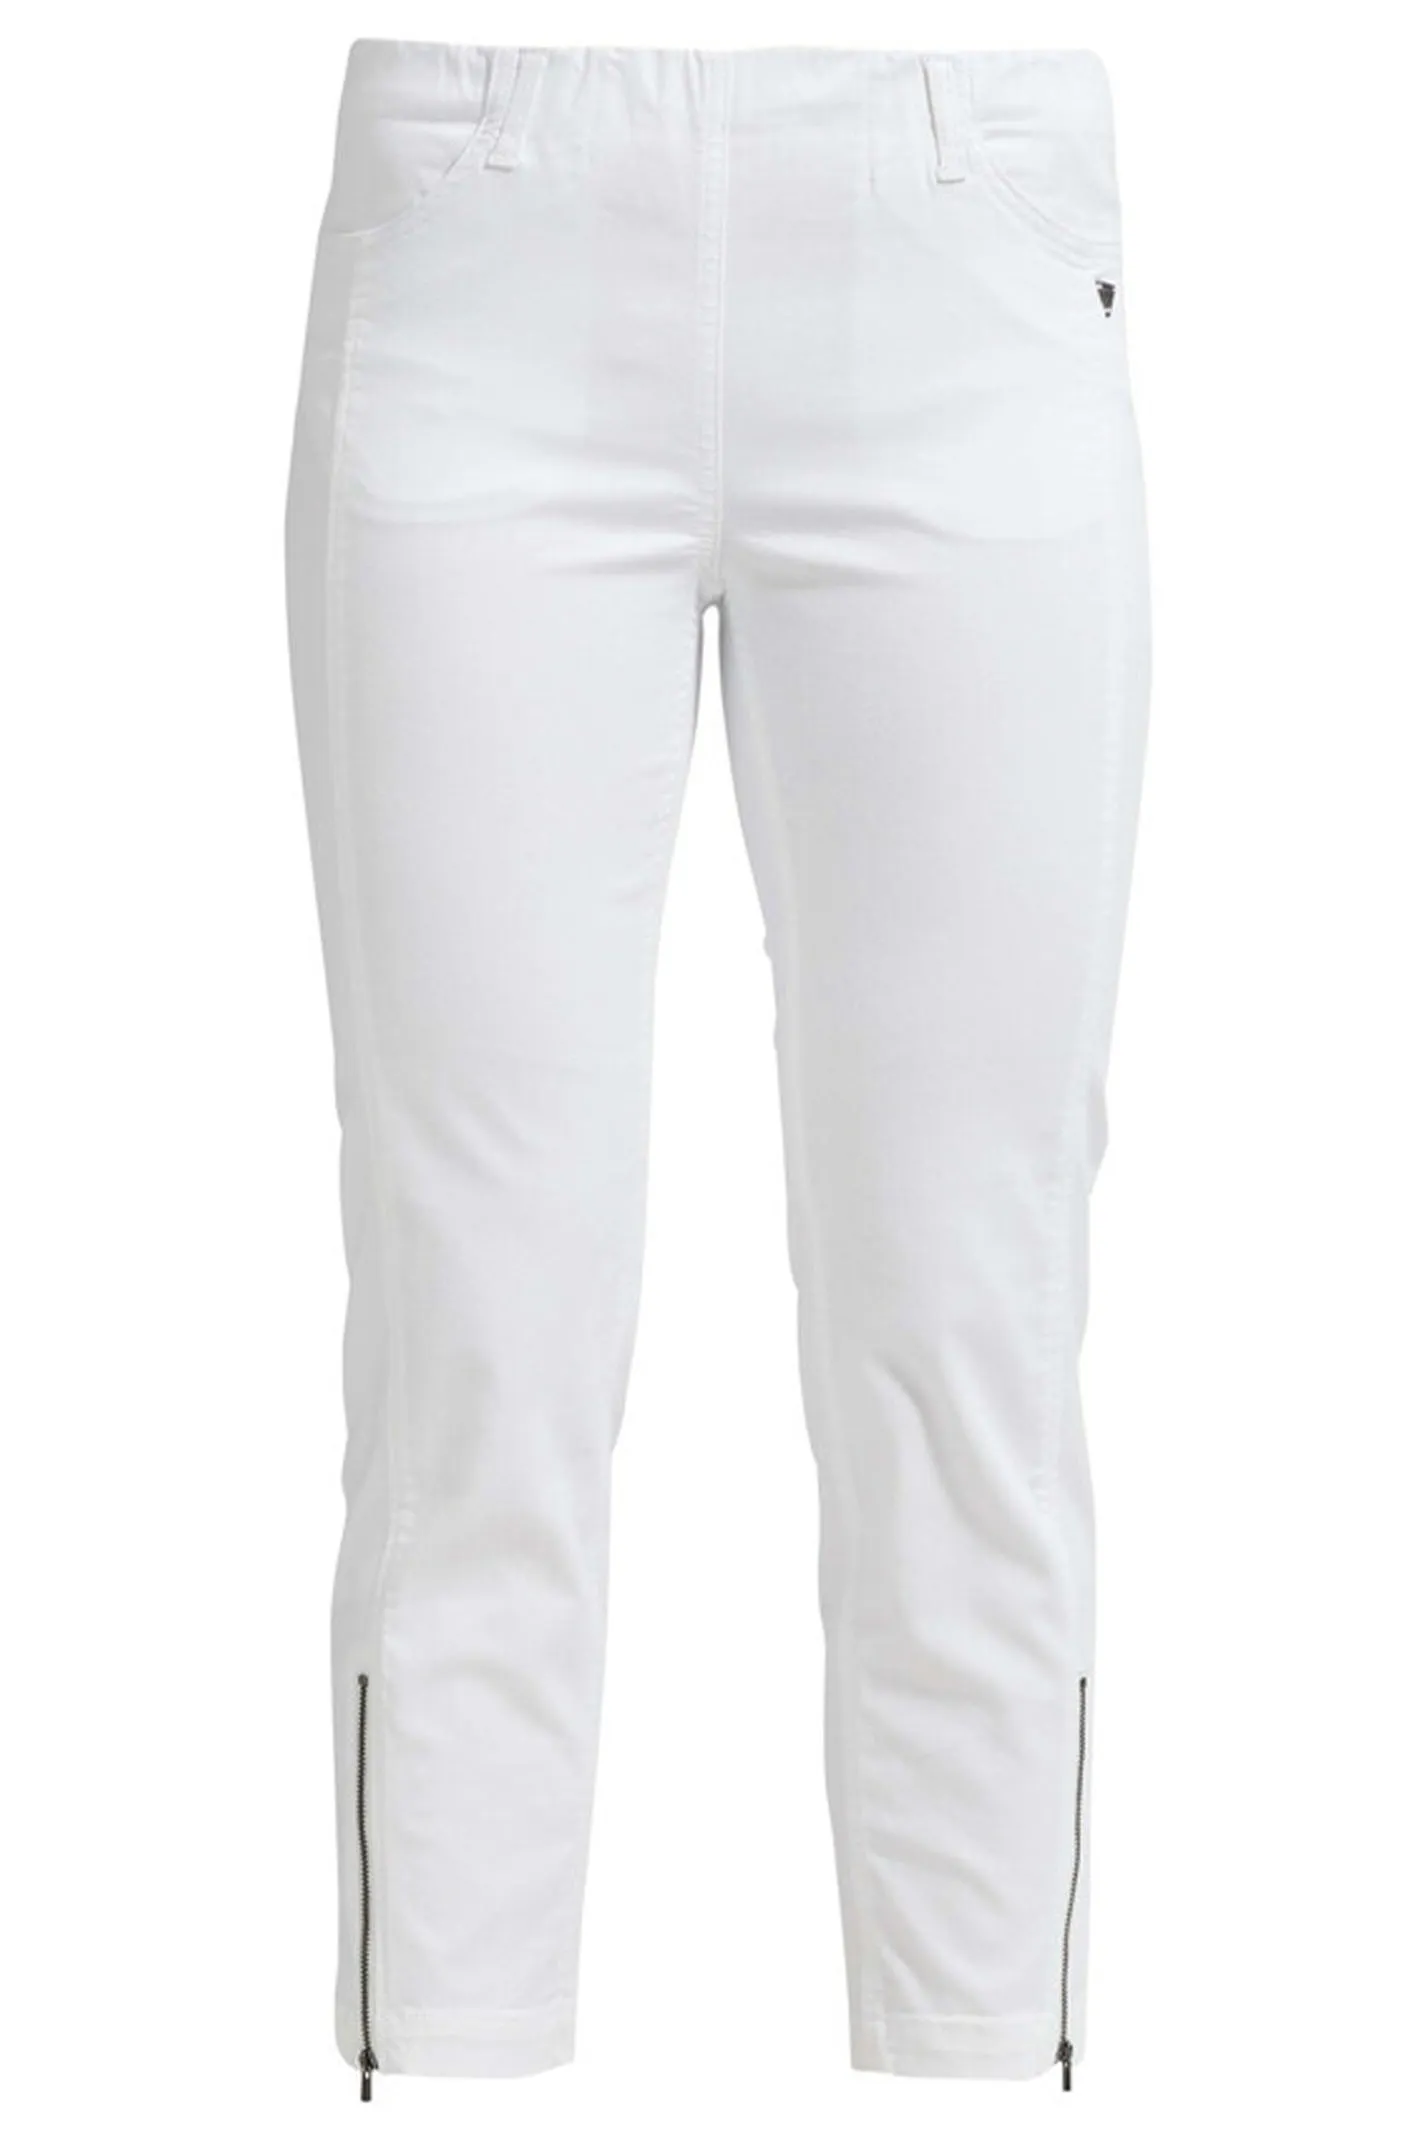 cement melon Reskyd 22465-10100 Pants White fra Laurie.